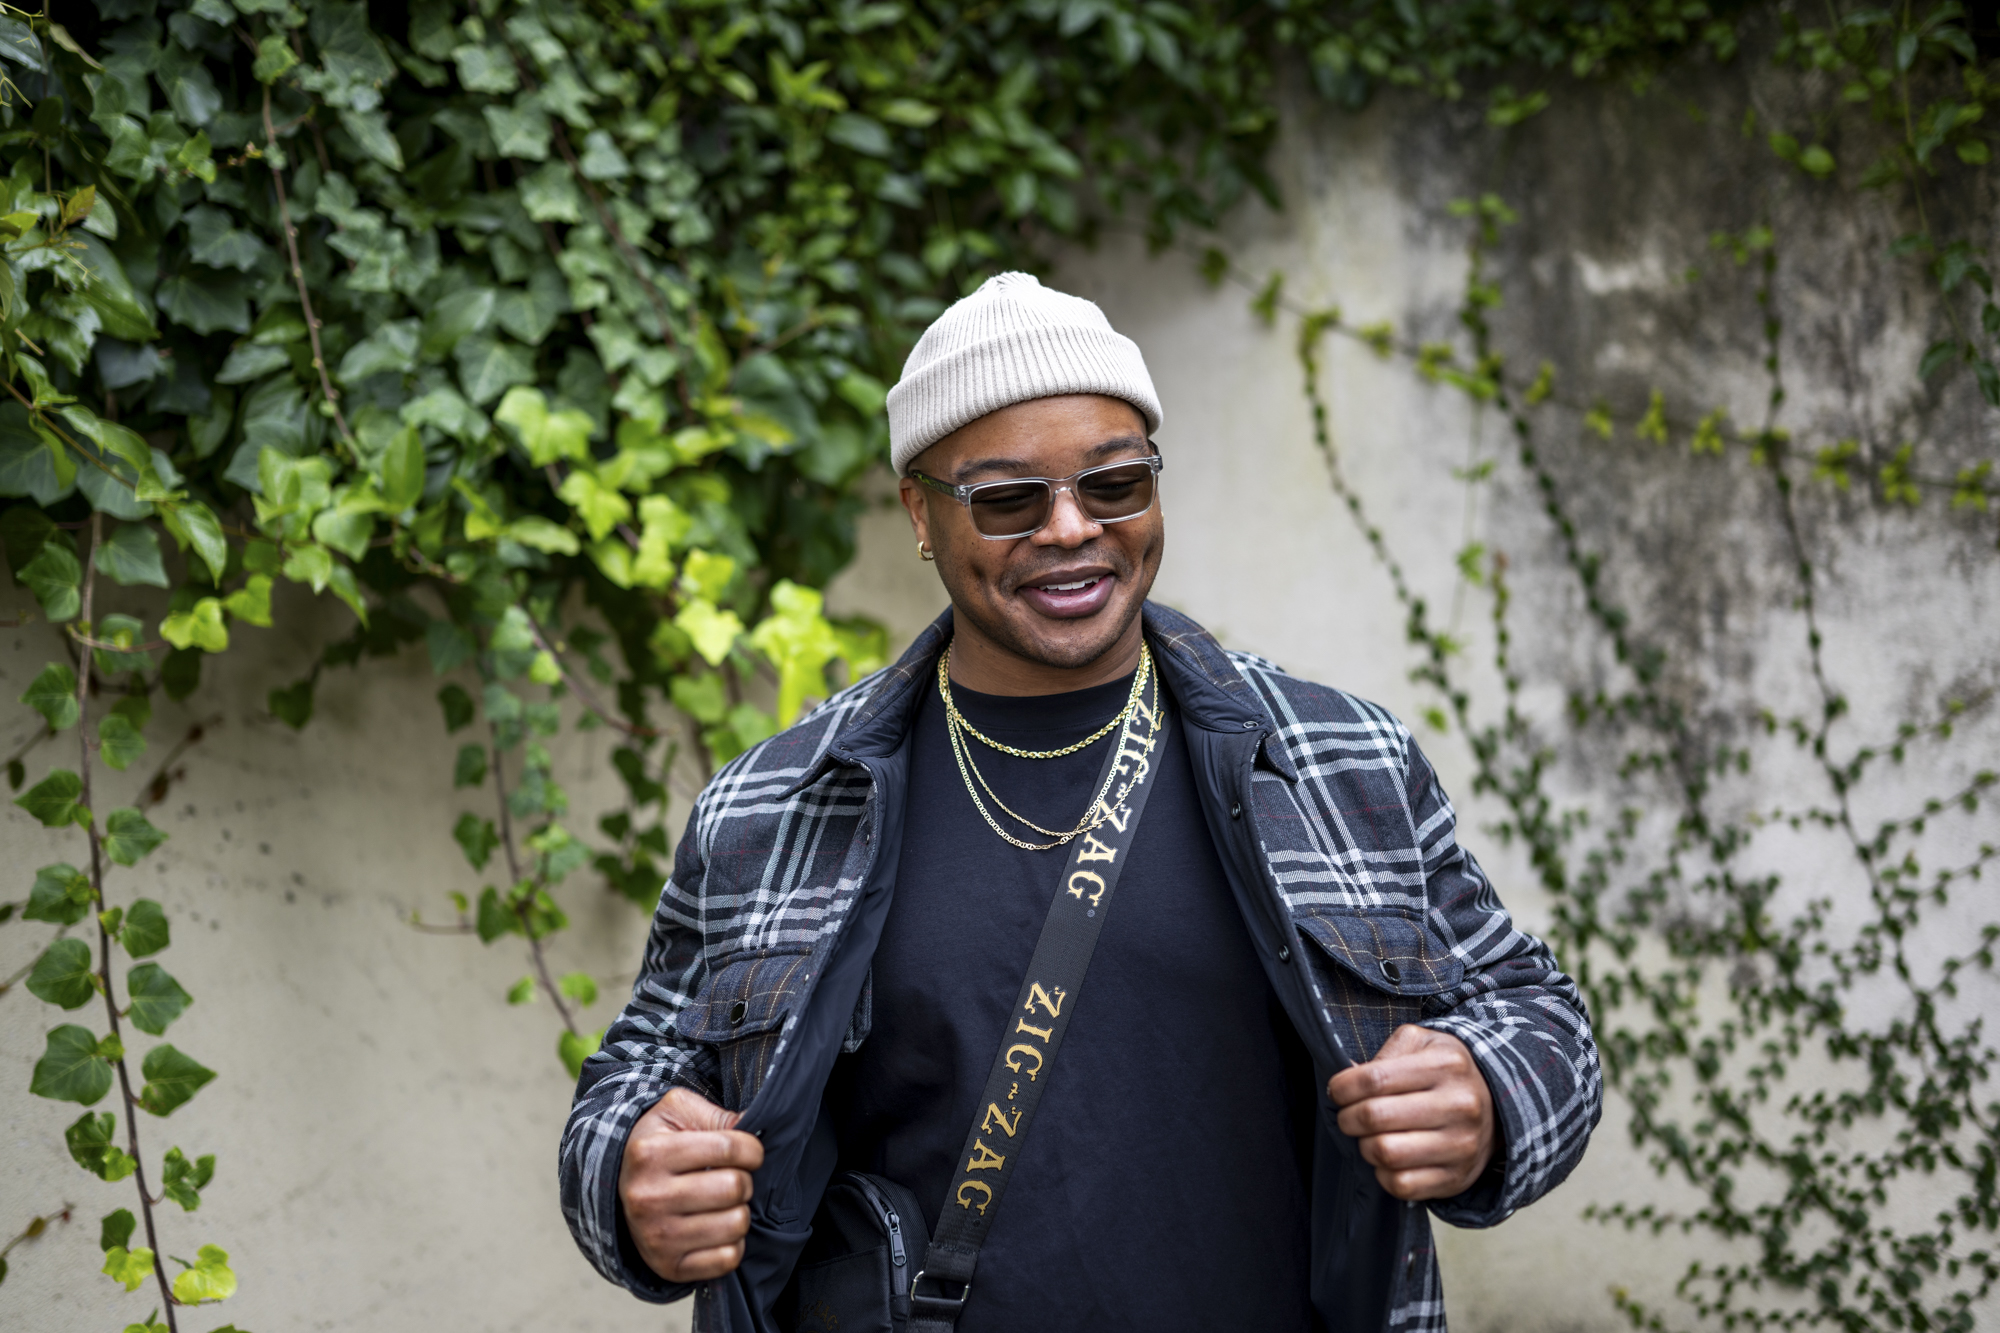 Person in white beanie, plaid jacket, dark shirt, cross-body bag opens jacket and smiles